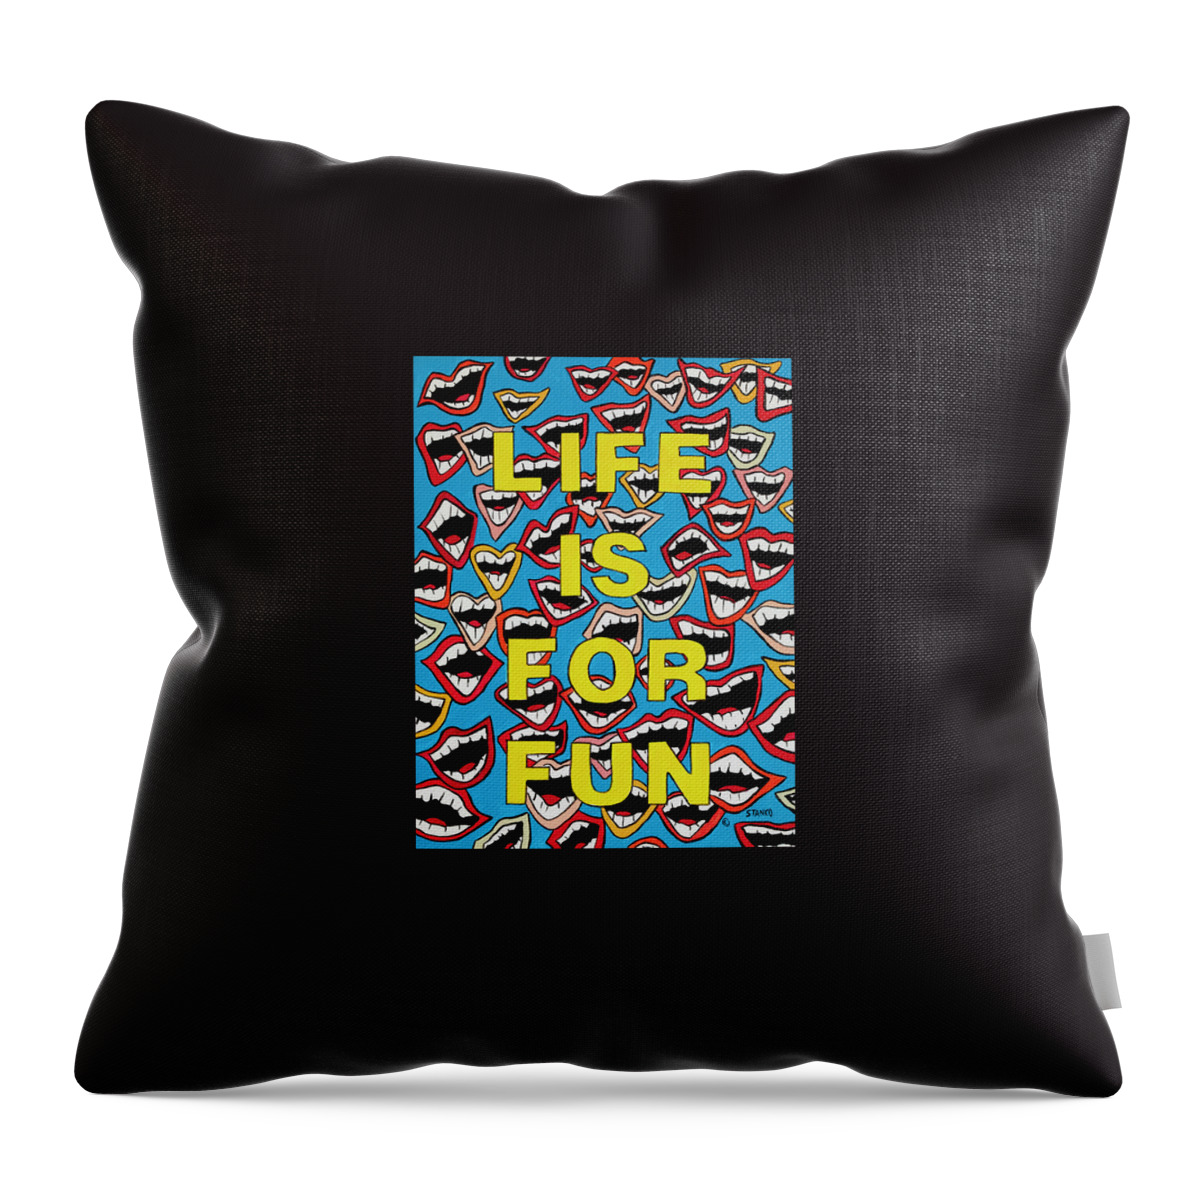 Life Fun Happy Happyface Smile Throw Pillow featuring the painting Life is for Fun by Mike Stanko